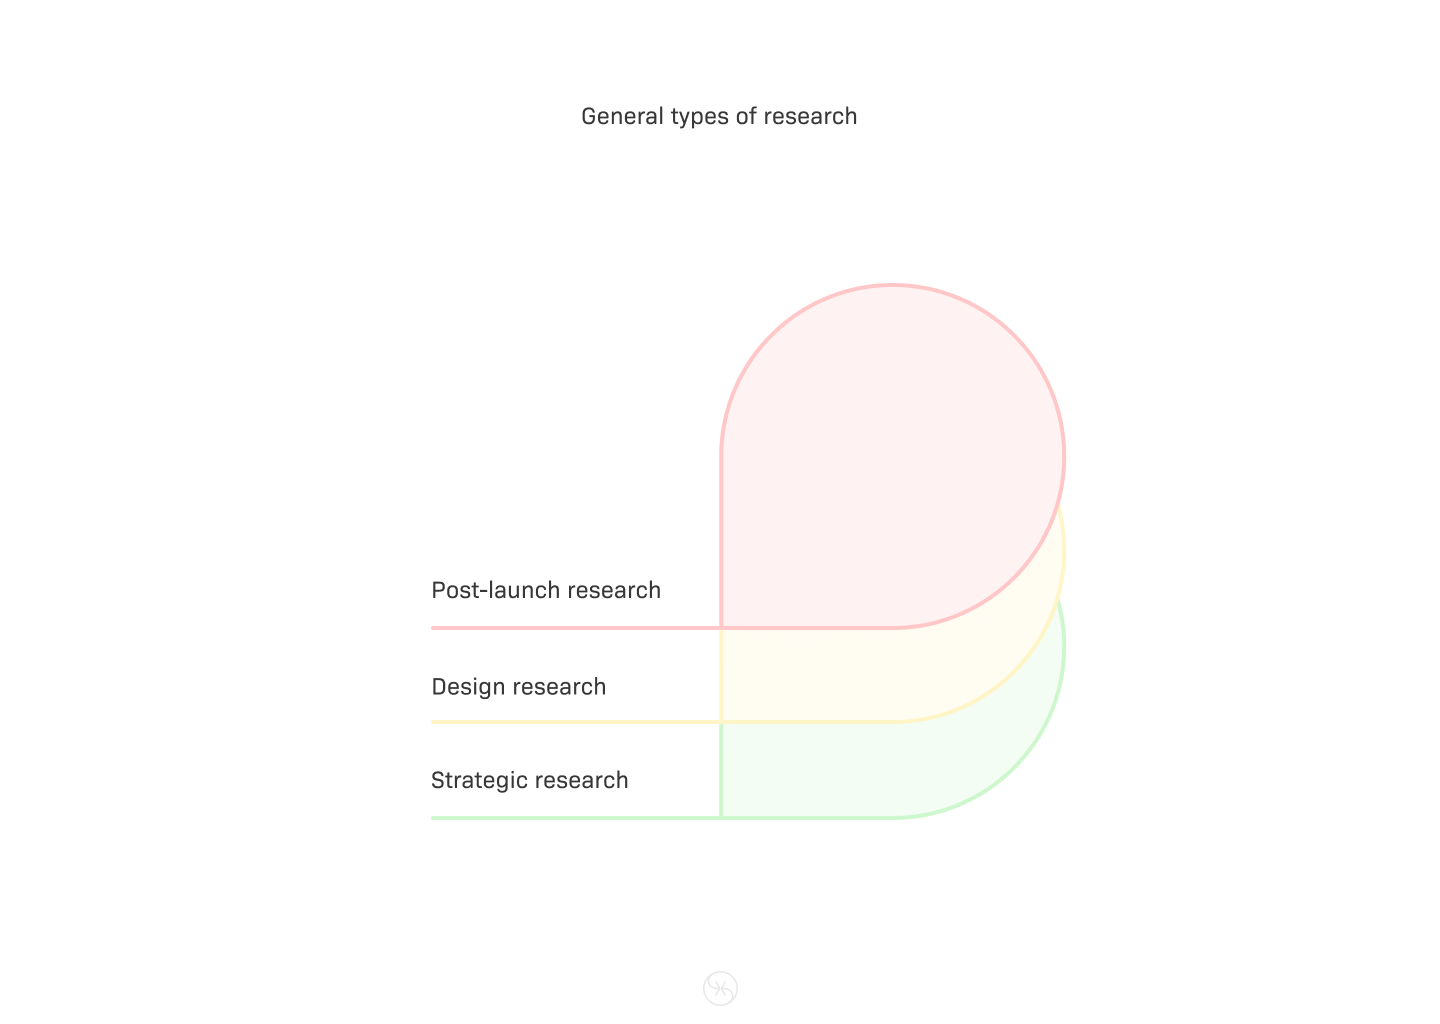 General types of research illustration.